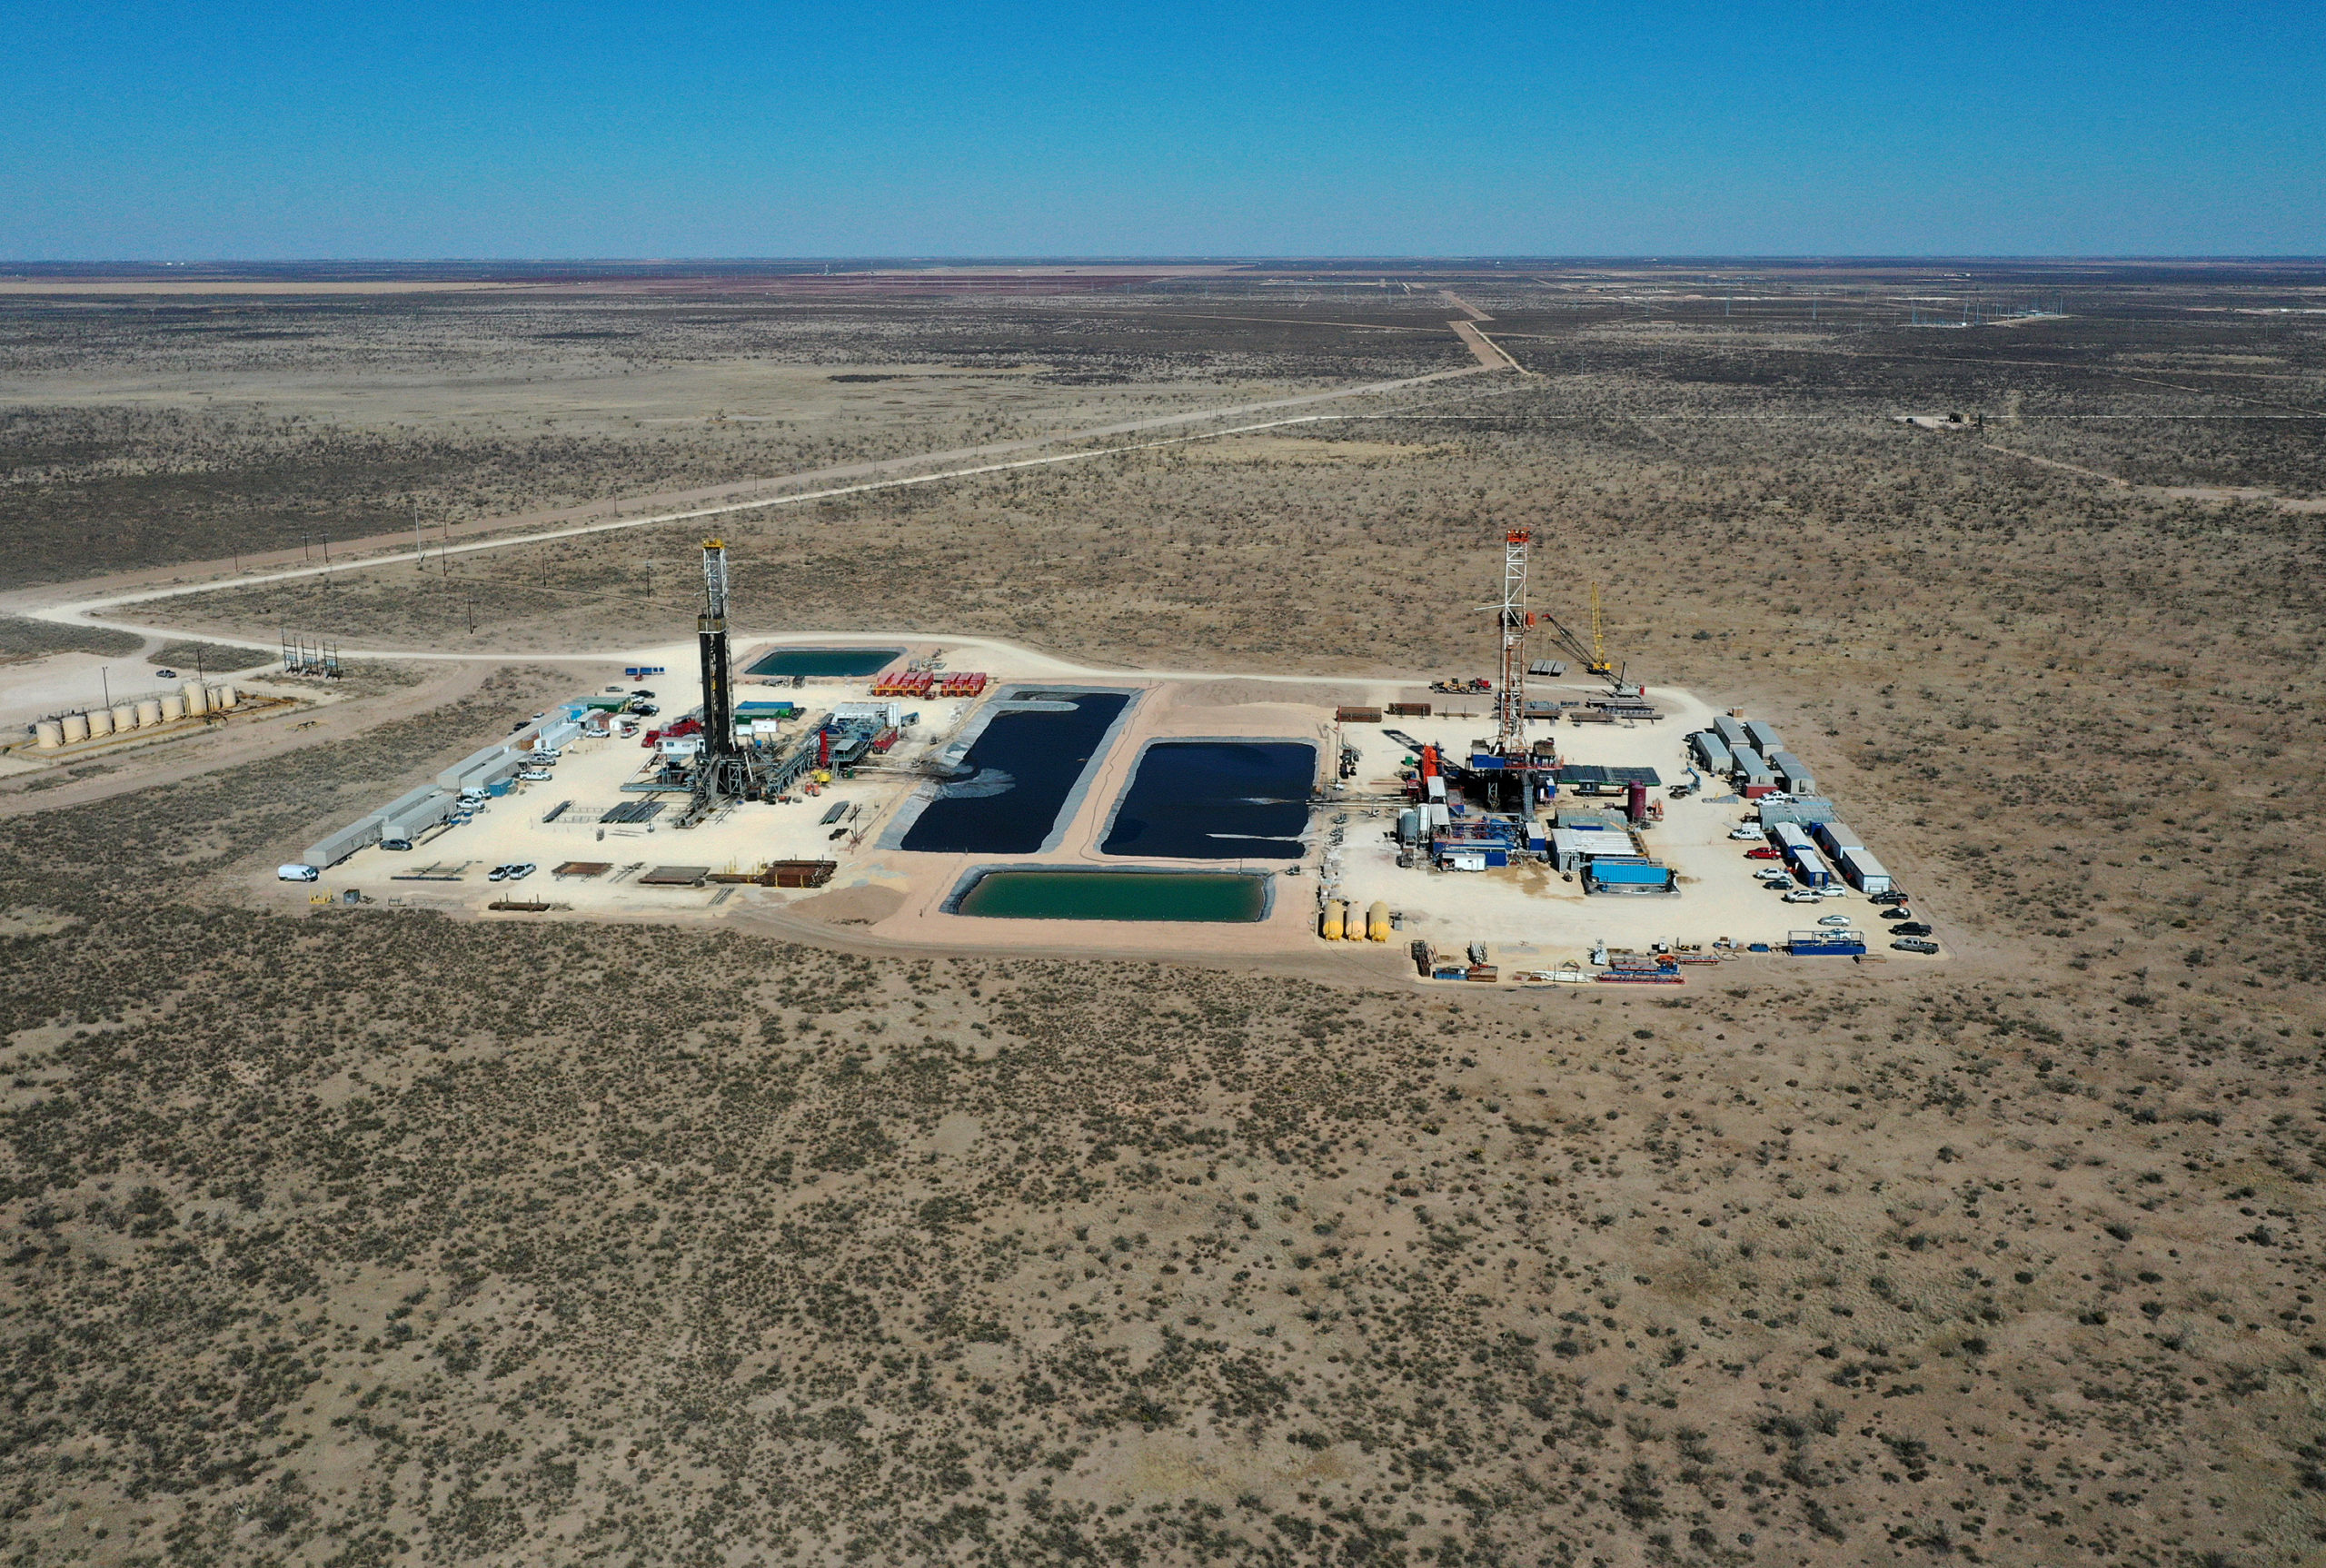 Oil drilling rigs work in the Permian Basin oil field on March 13 in Midland, Texas. (Joe Raedle/Getty Images)